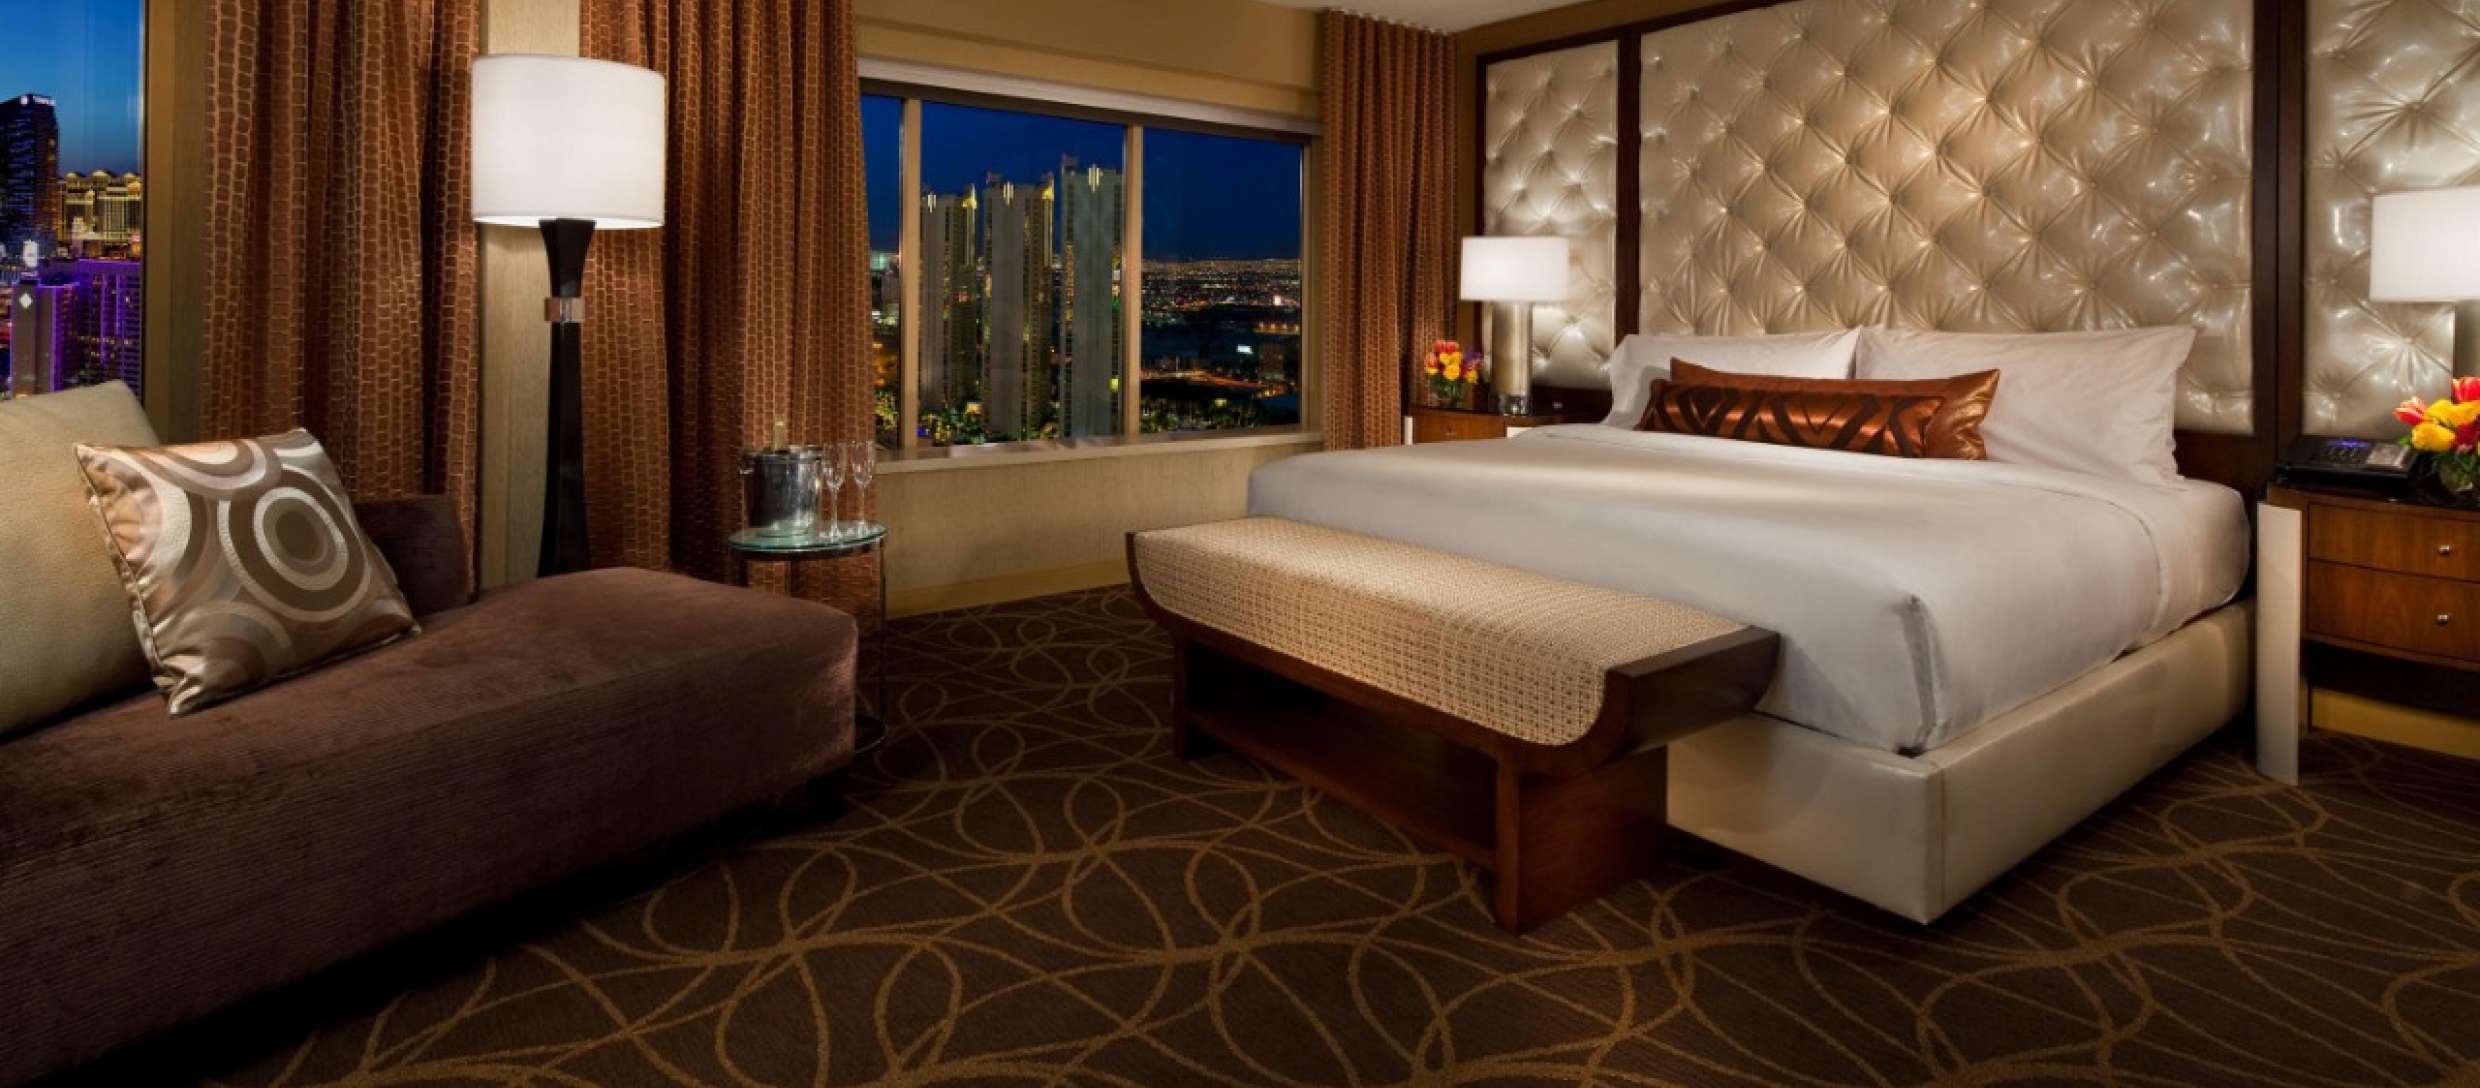 mgm-grand-hotel-rooms-skyline-marquee-suite-interior-bedroom-@2x.jpg.image.2480.1088.high